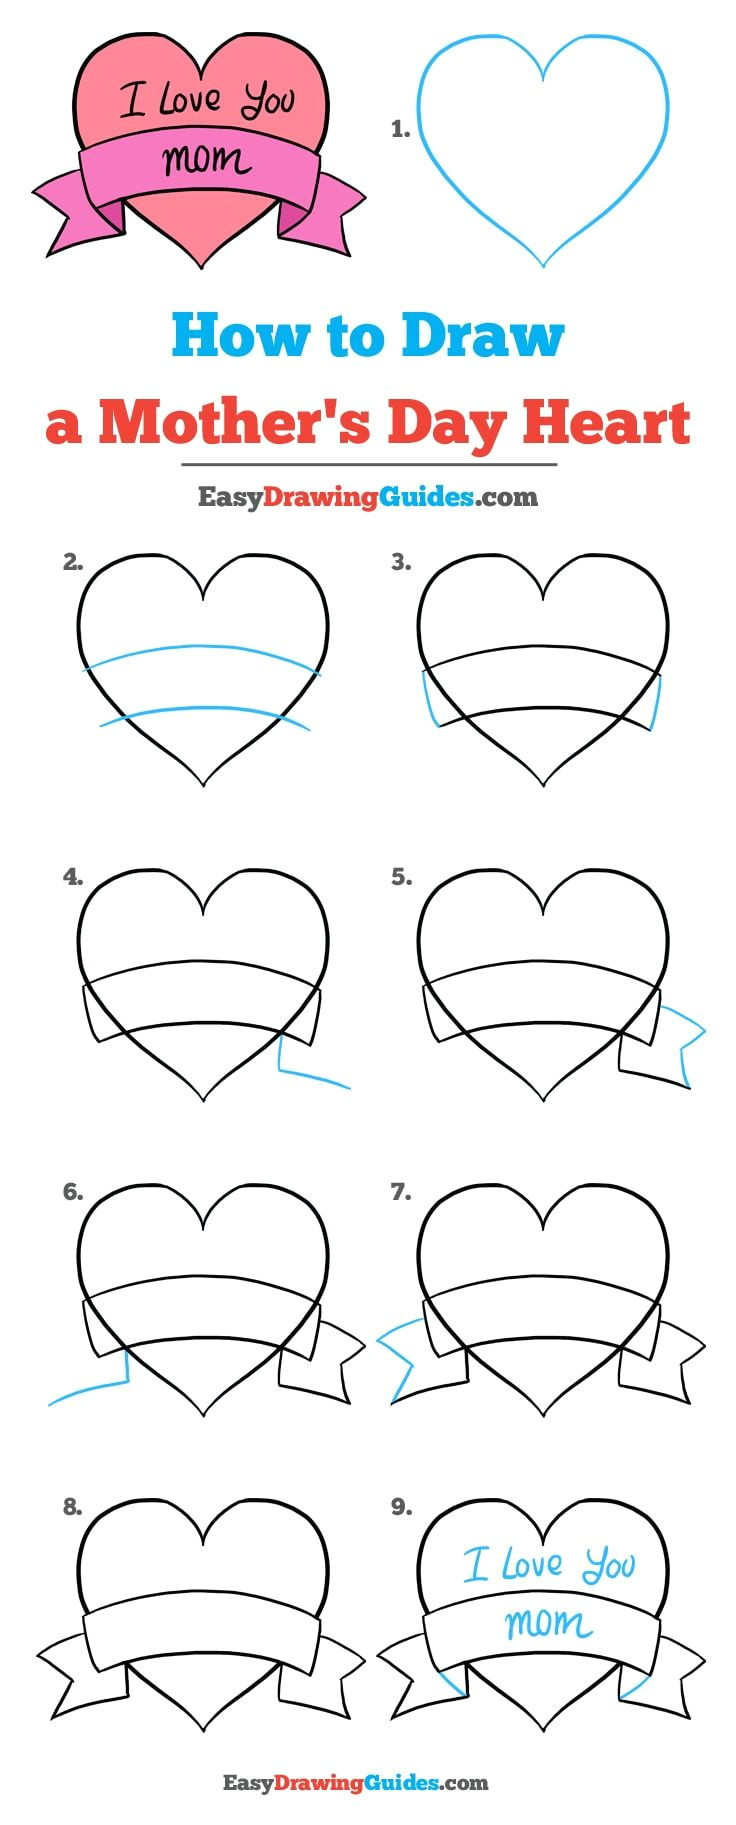 Show Me some Easy Drawings How to Draw A Mother S Day Heart Really Easy Drawing